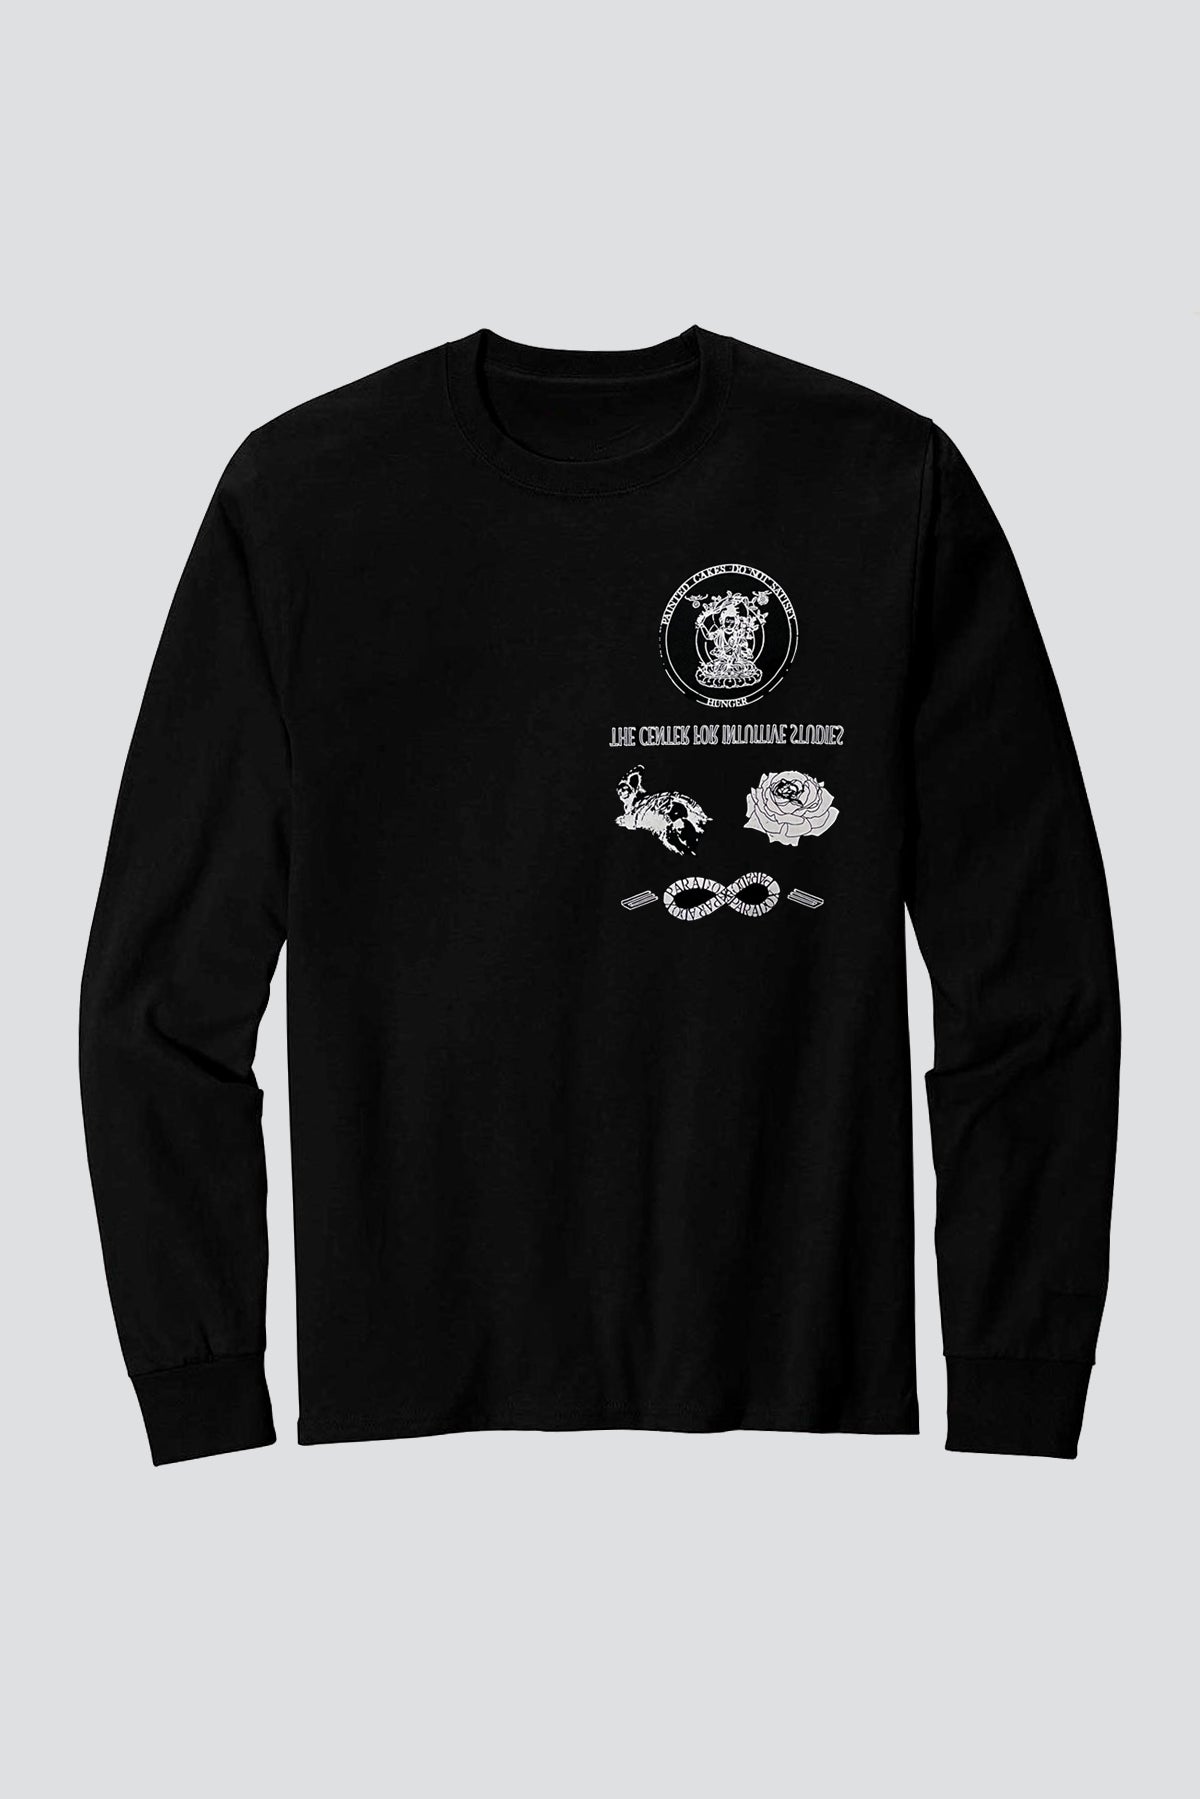 Black The Center For Intuitive Studies Long Sleeve